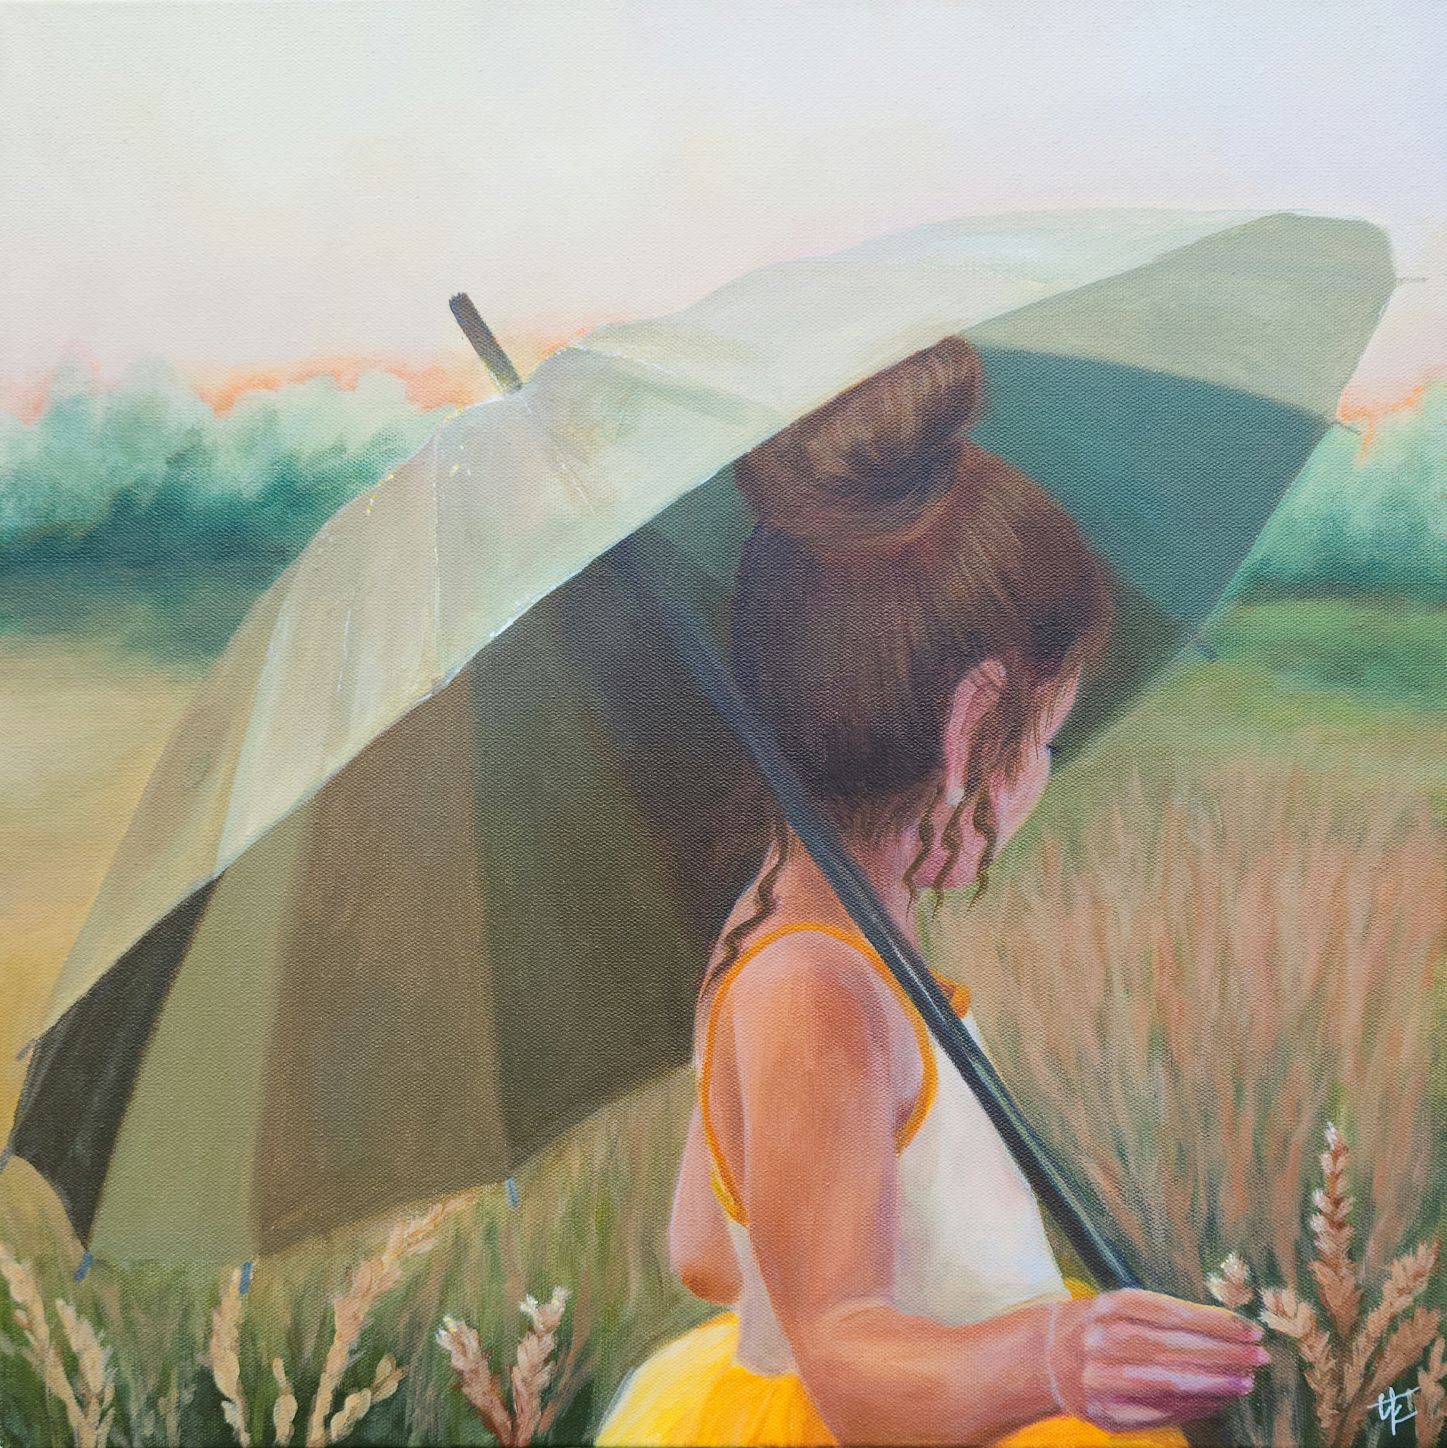 Acrylic painting of a girl holding an umbrella